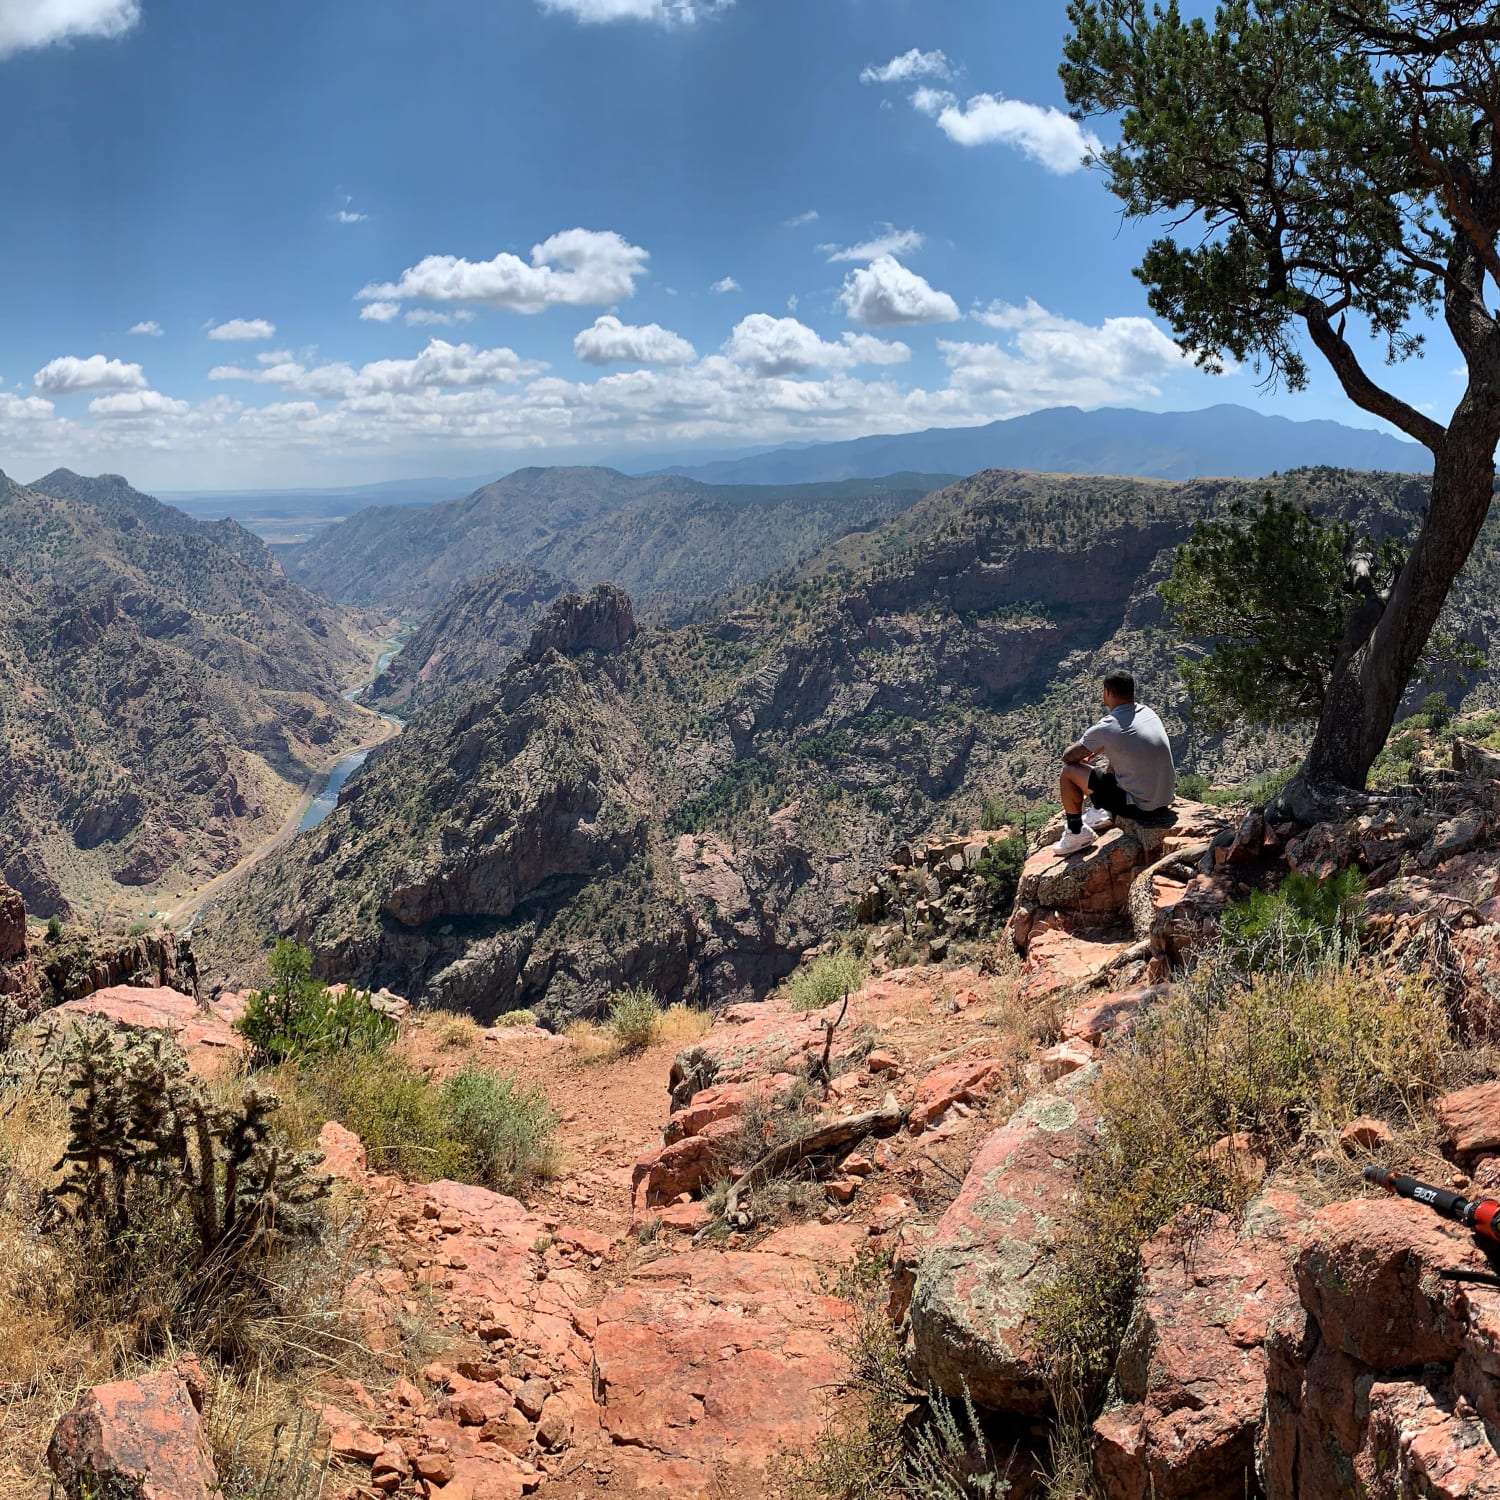 Royal Gorge, Colorado, USA; sometimes when you’re adulting you can stumble upon some great views and it’s best to just sit and take it all in. ⛰